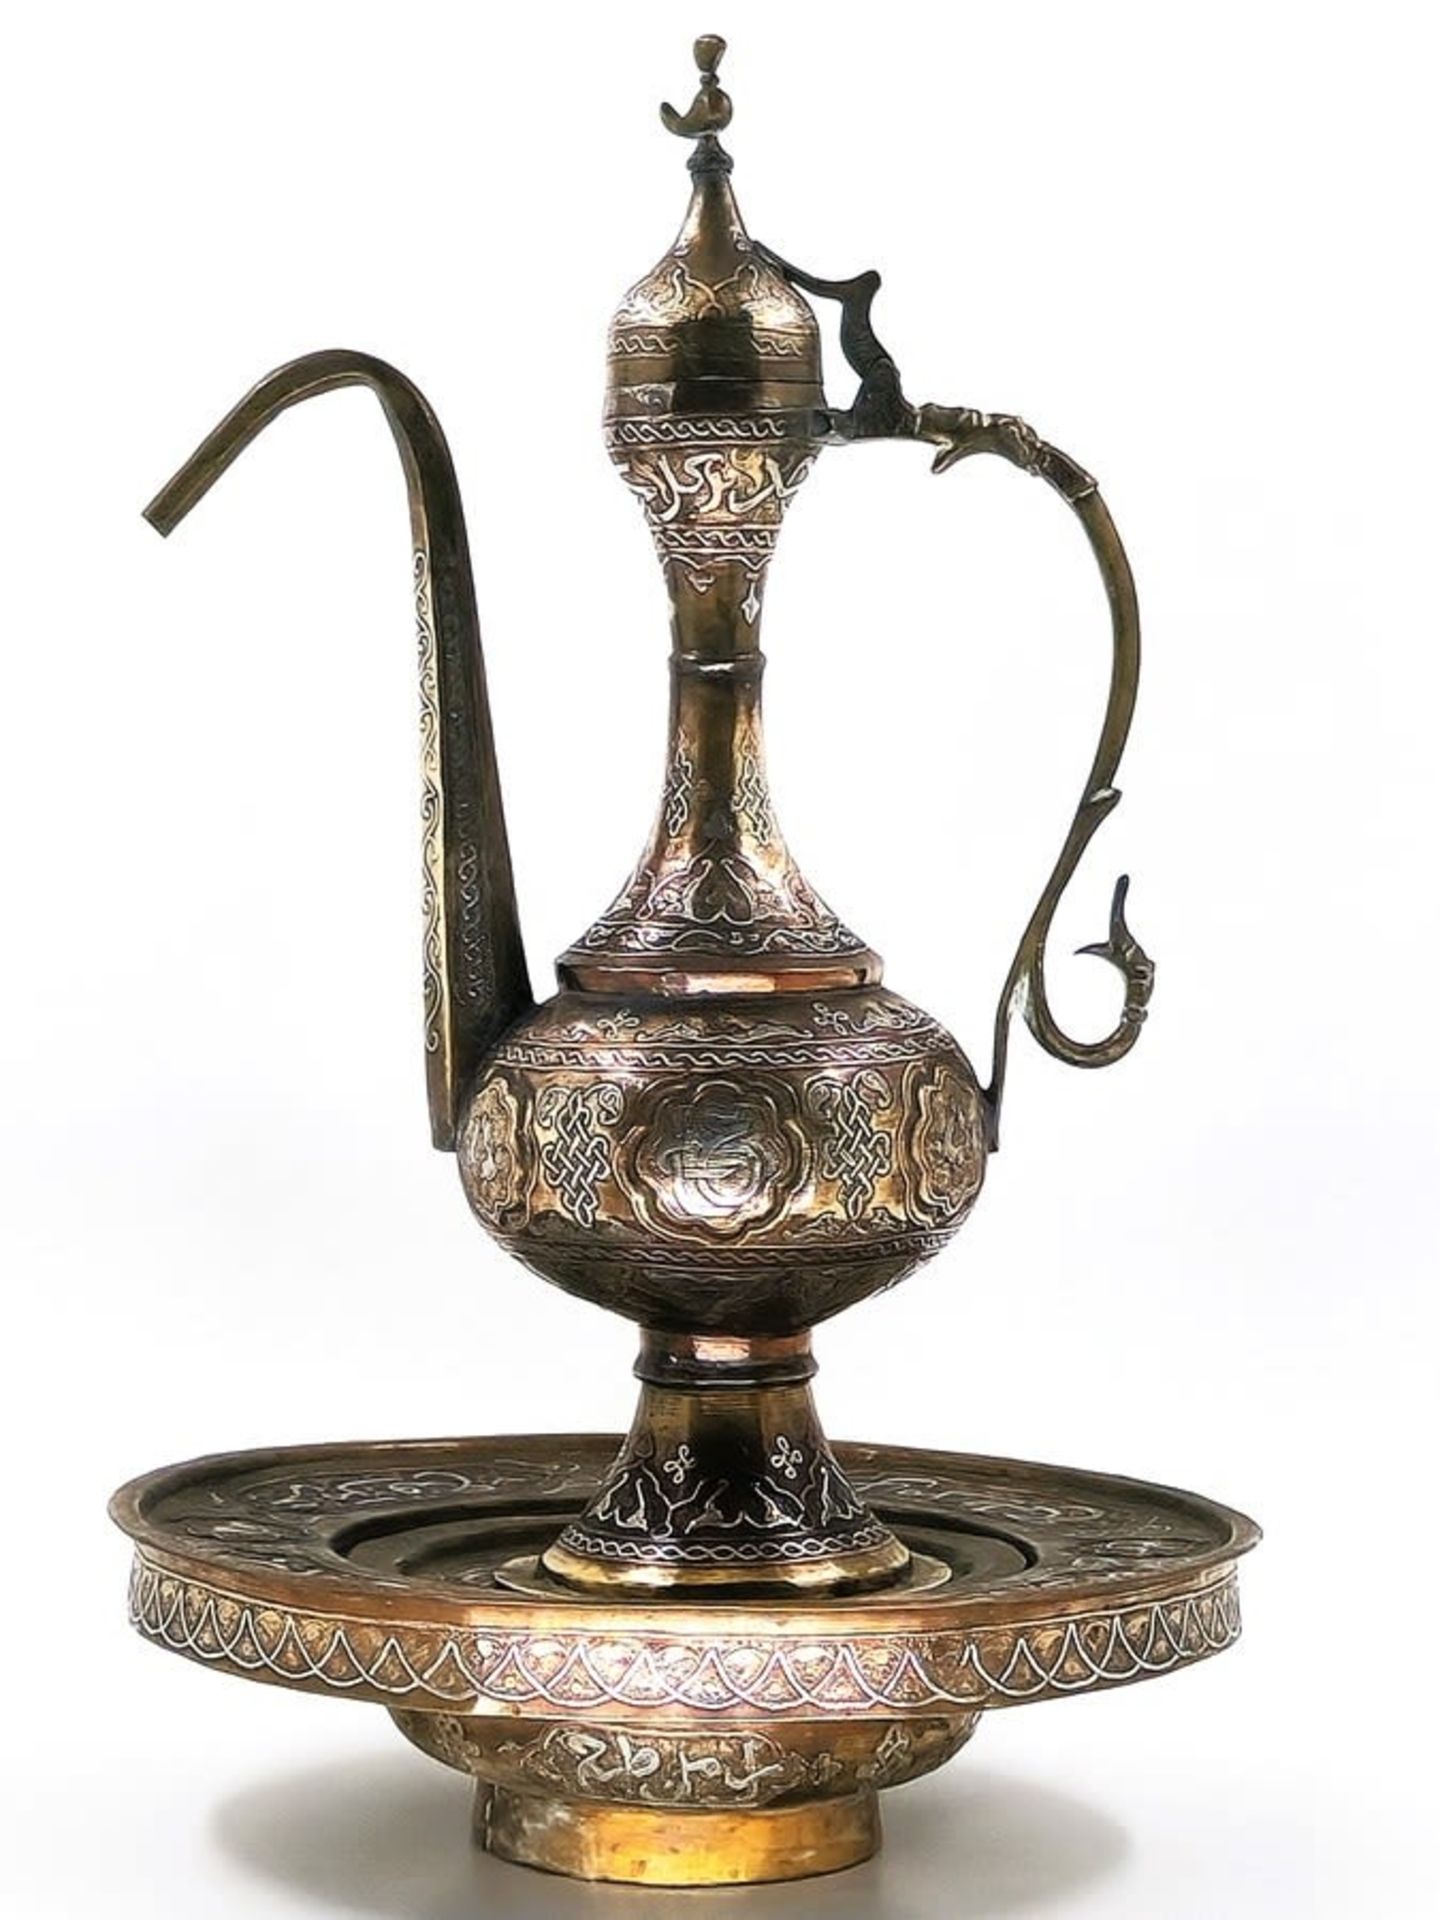 Islamic Aftaba with matching basin and strainer, decorated with Damascus work (inlay of copper and